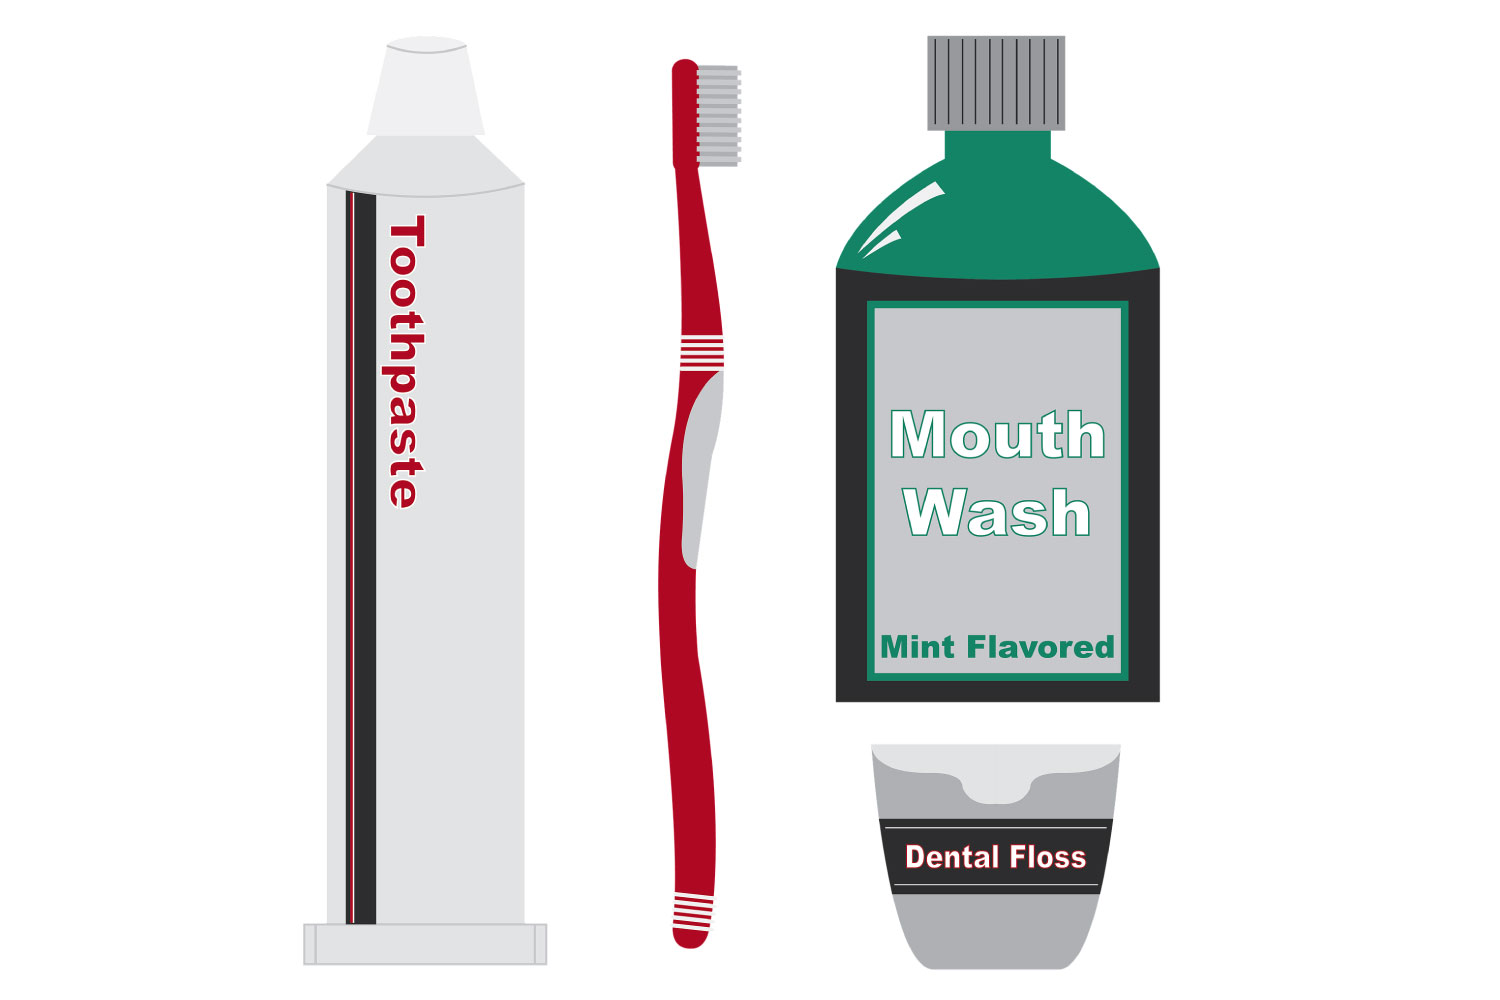 Graphic showing oral care products: toothpaste, toothbrush, floss & mouthwash.